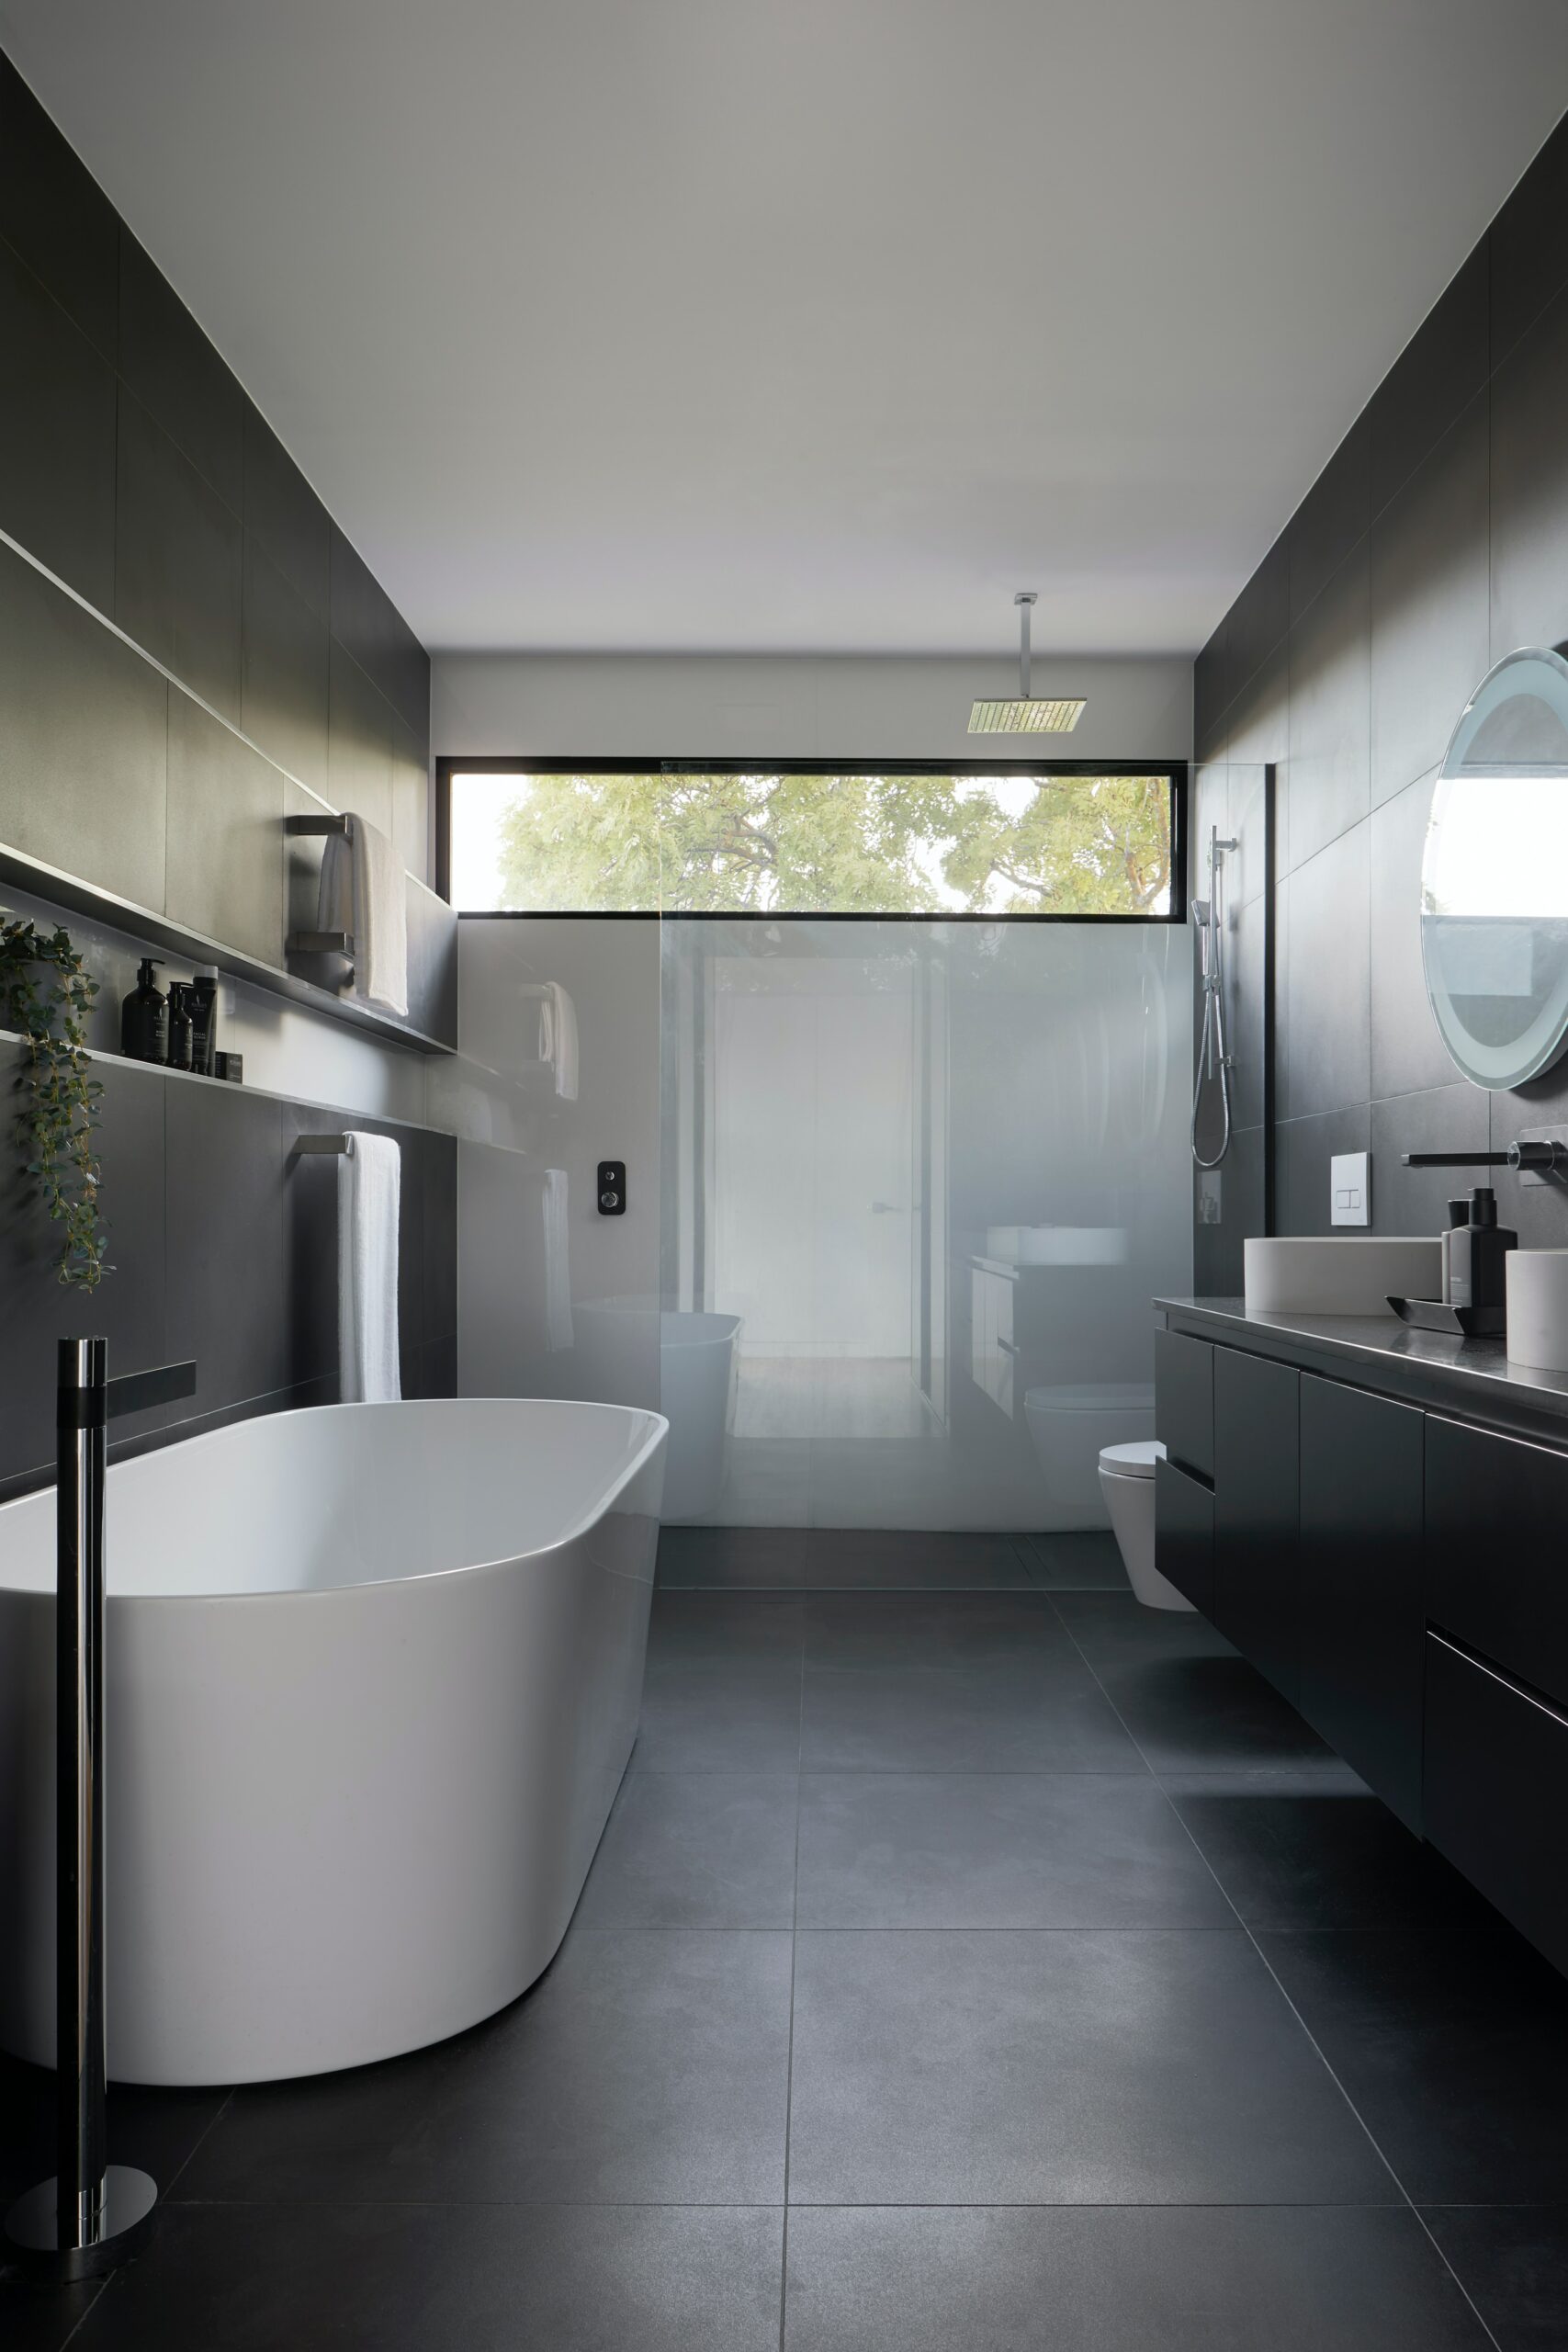 Costs of Renovating a Bathroom: A Breakdown of What to Expect and How to Budget